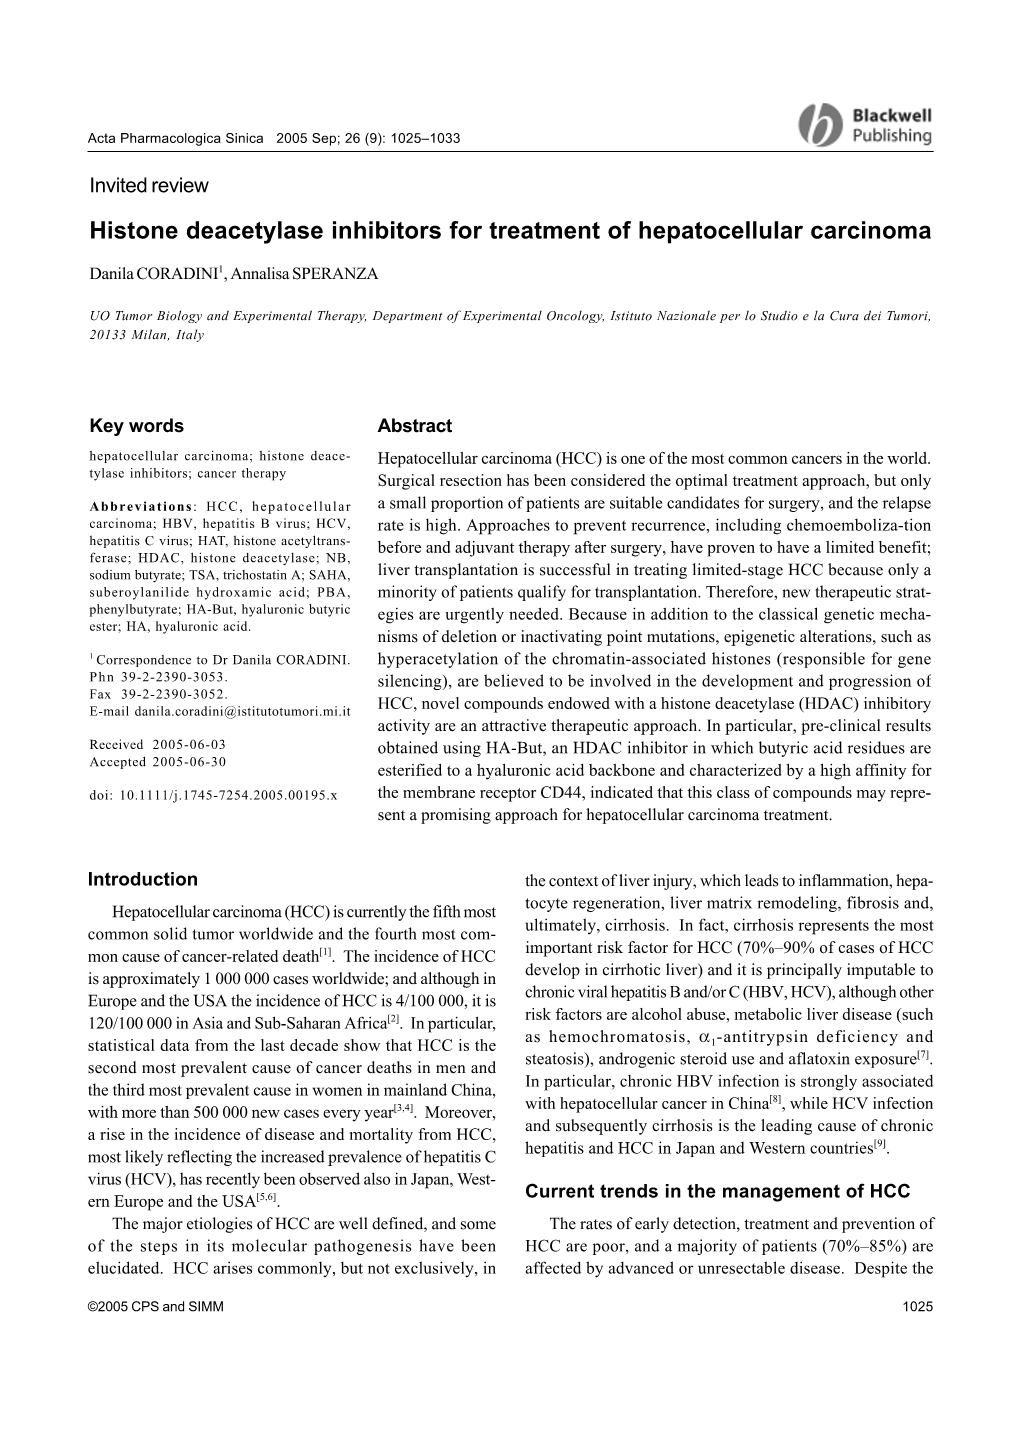 Histone Deacetylase Inhibitors for Treatment of Hepatocellular Carcinoma